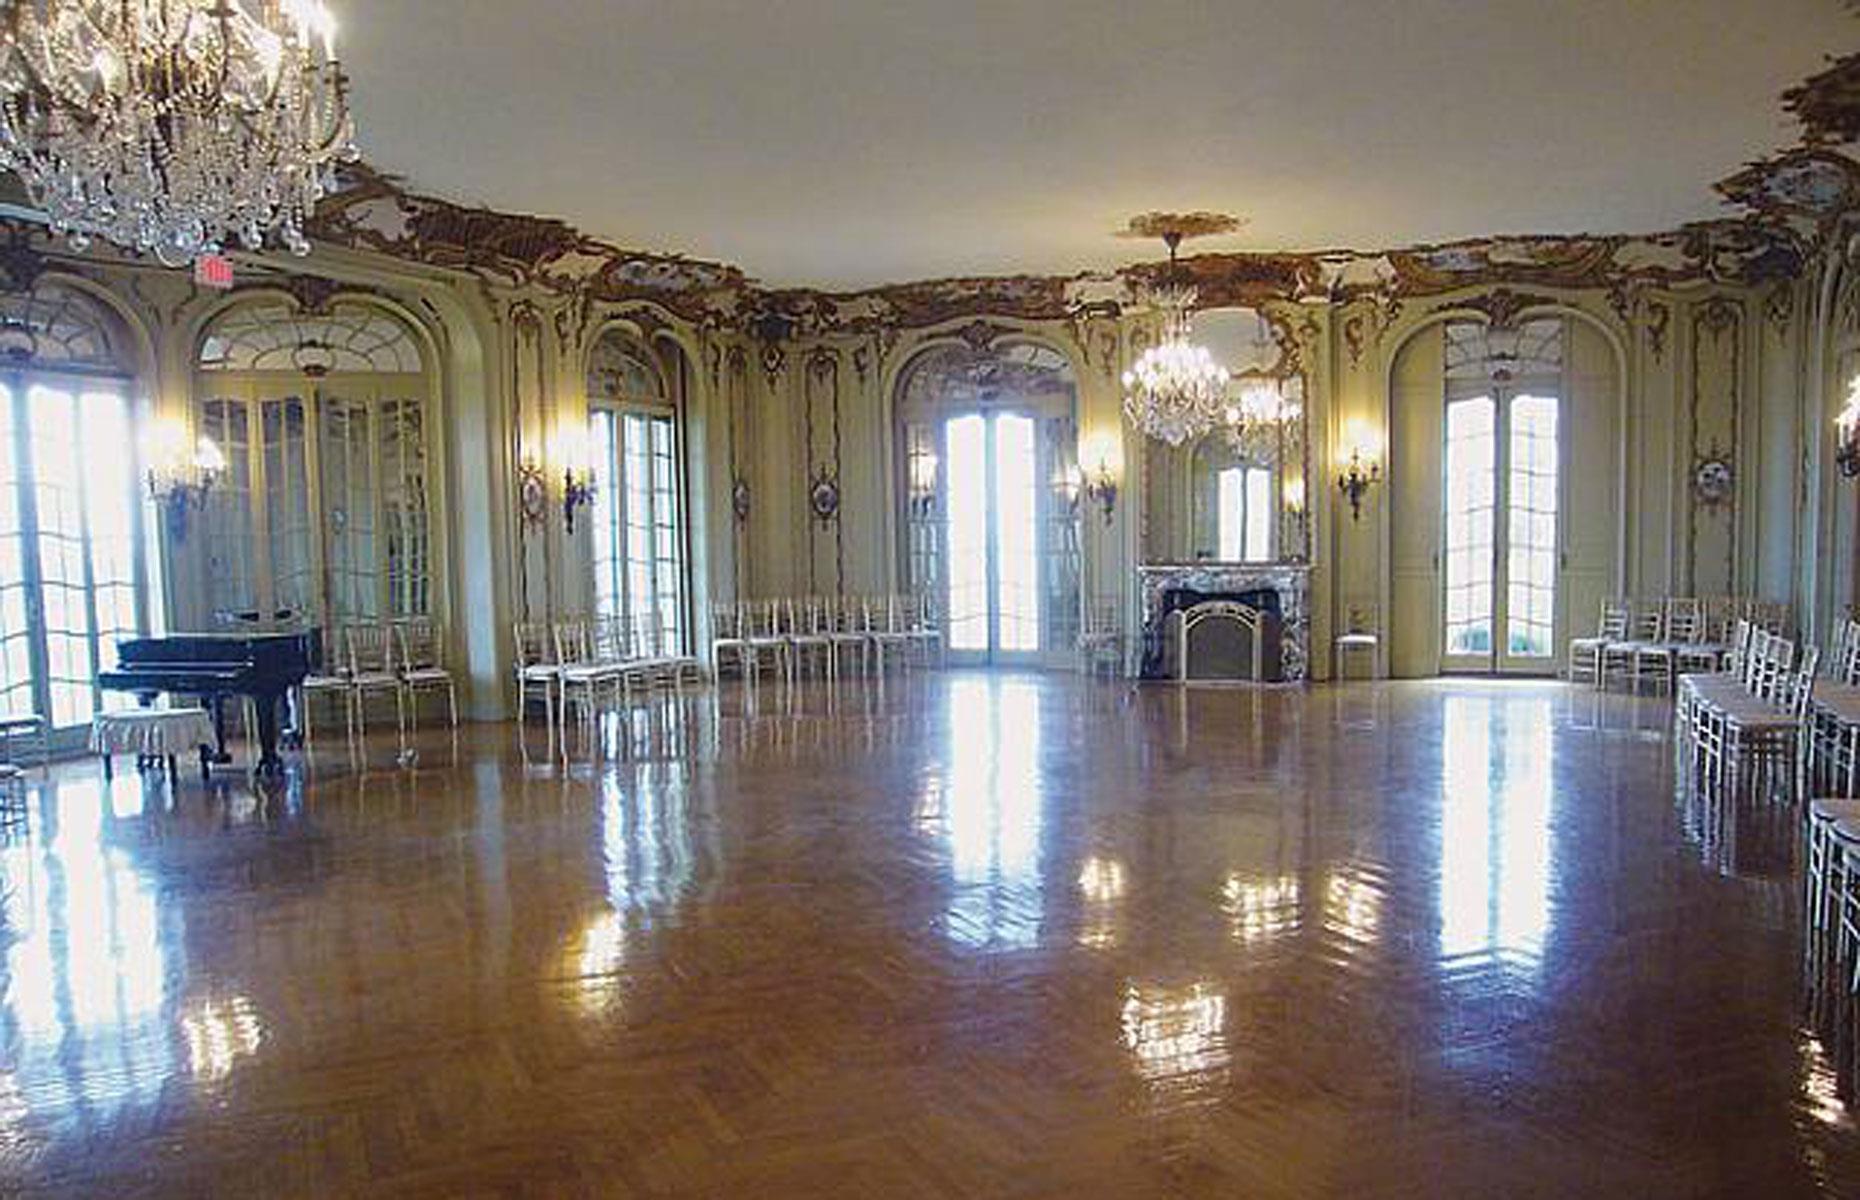 <p>With parquet floors, glittering chandeliers and gold moulding inspired by Versailles, the magnificent mansion was as much a statement of wealth and power as any home decorated by the Vanderbilts.</p>  <p>After William Backhouse’s passing, Beechwood was inherited by his son John Jacob Astor IV, who married his wife Madeleine in the ballroom but died in the sinking of the Titanic in 1912. Madeleine continued to live at Beechwood until her own death in 1940.</p>